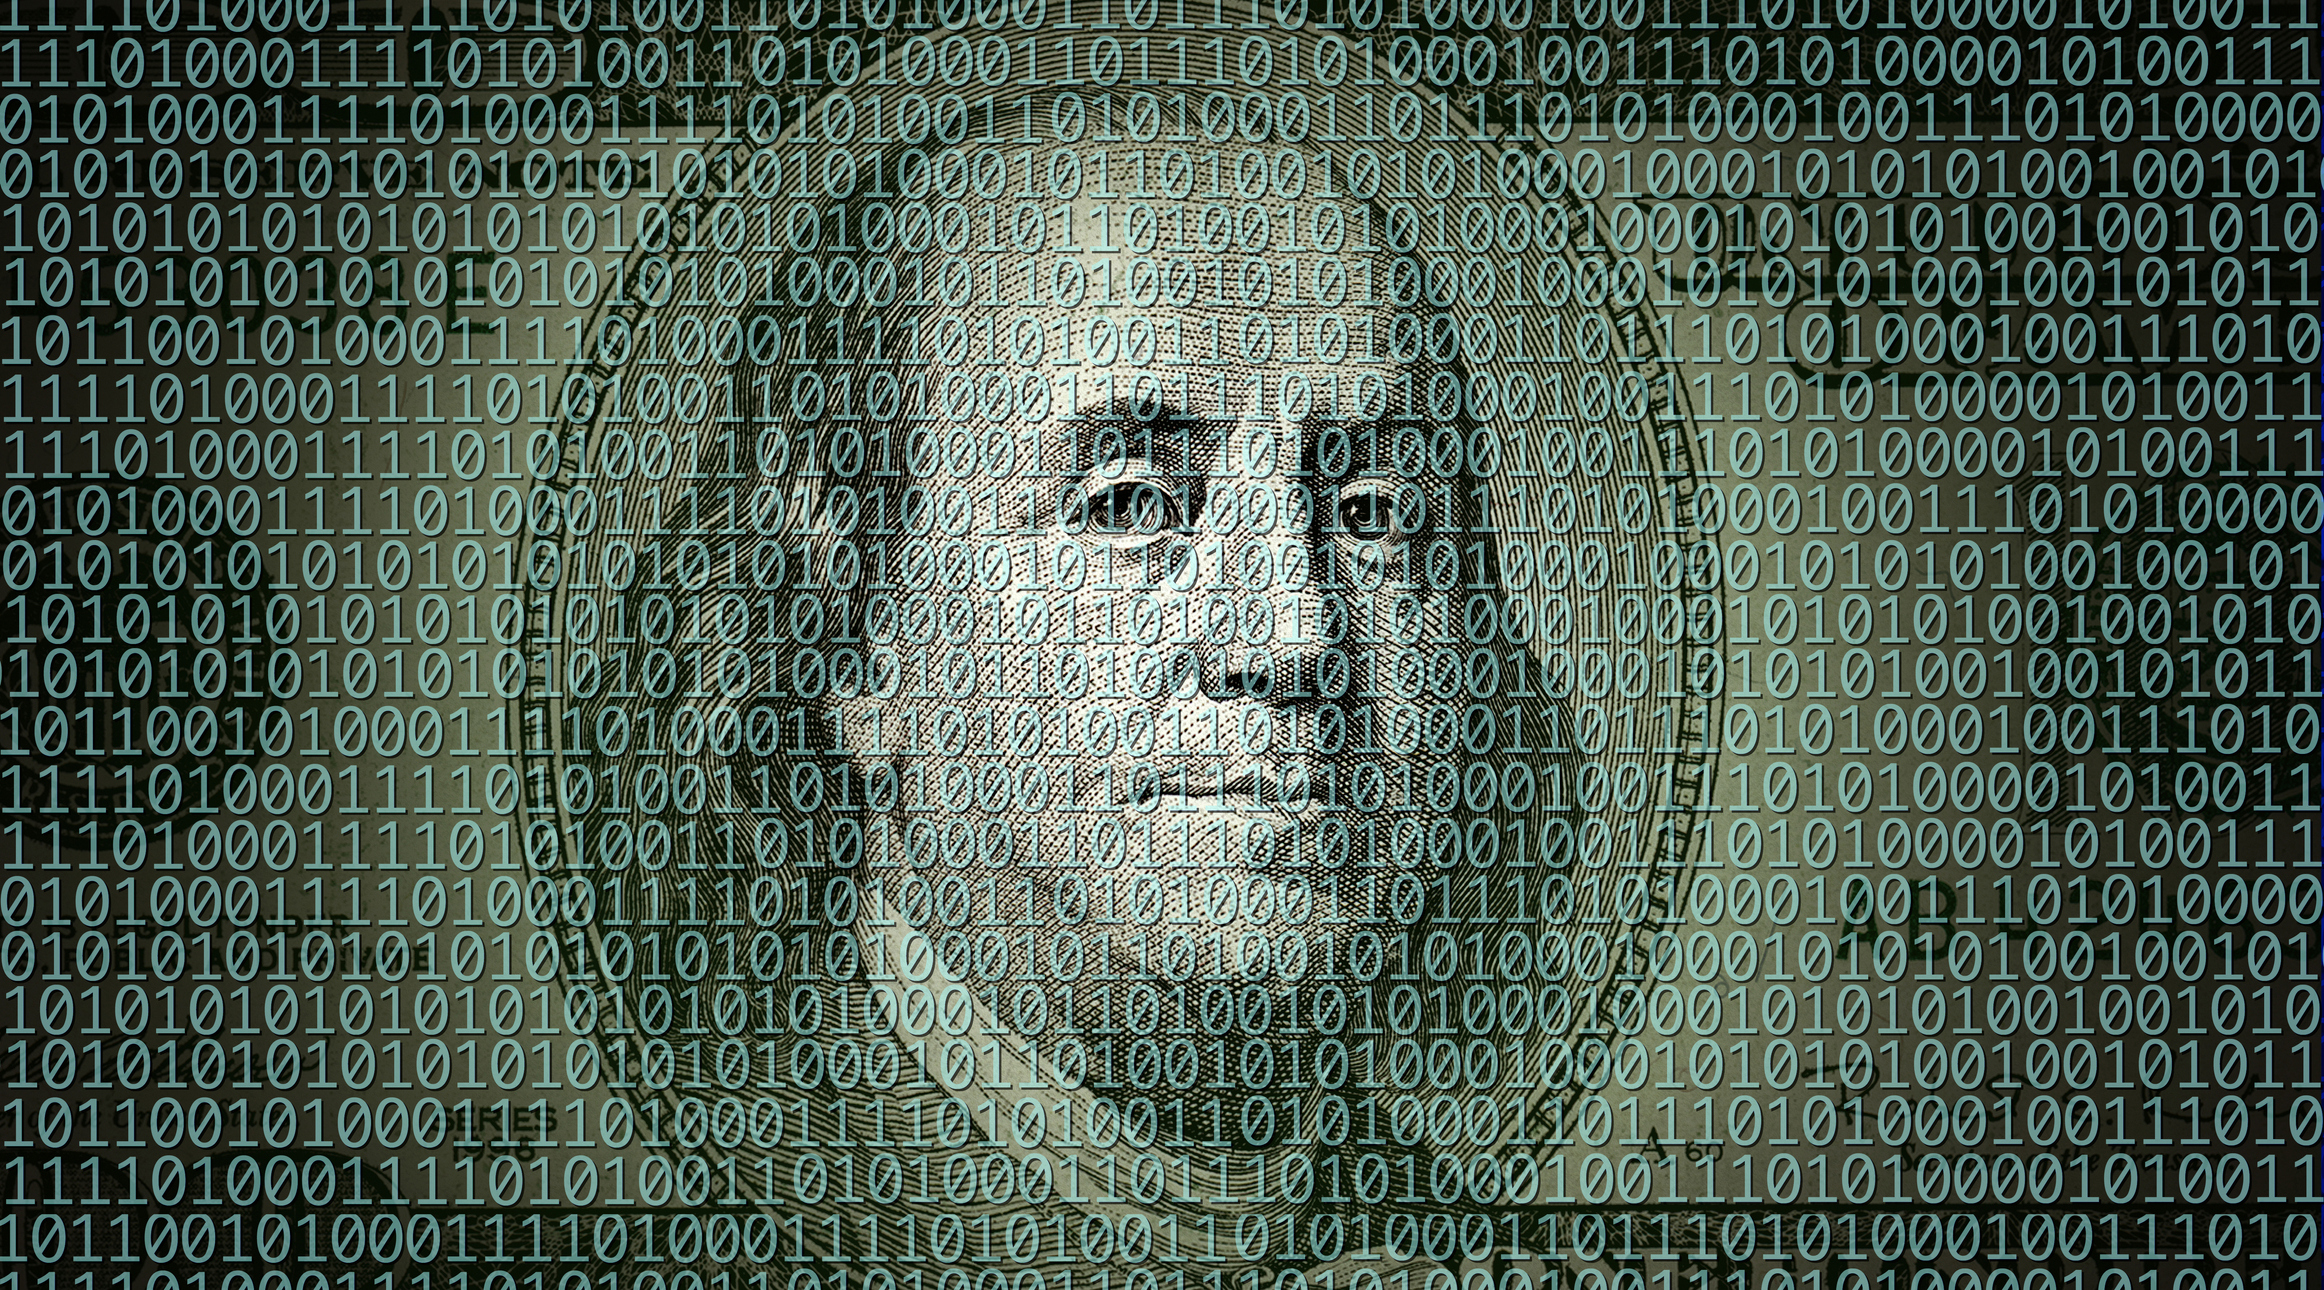 Binary Code On Hundred Dollar Bill Representing IRS Protecting Personal Information